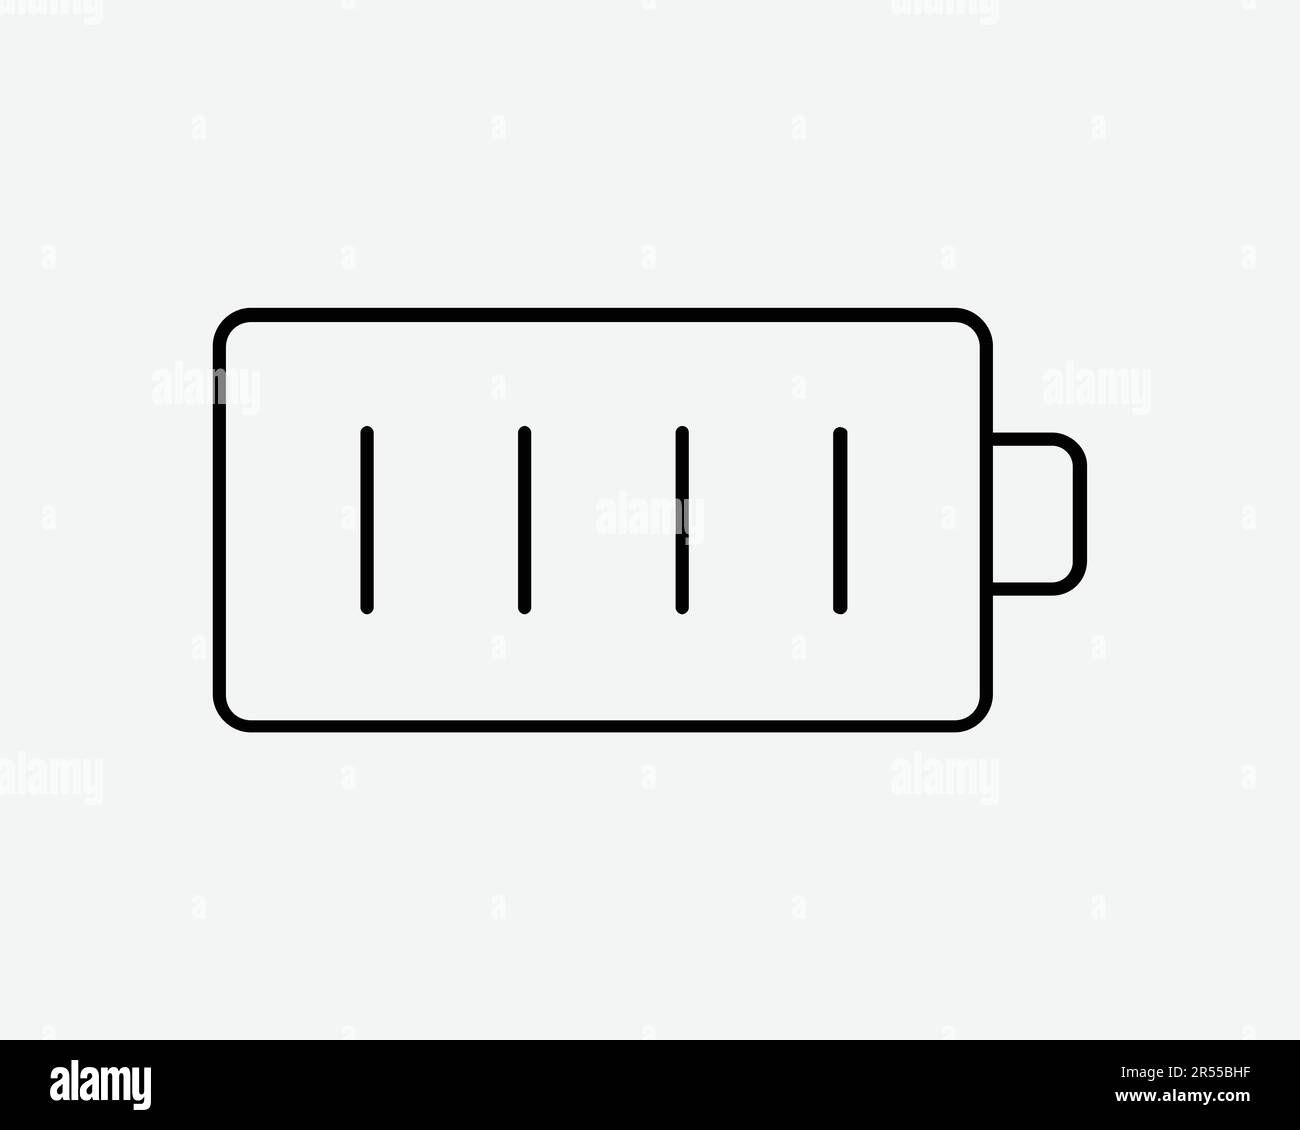 Battery Line Icon. Charge Power Energy Level Full Fully Charged Electric Electrical Sign Symbol Black Artwork Graphic Illustration Clipart EPS Vector Stock Vector